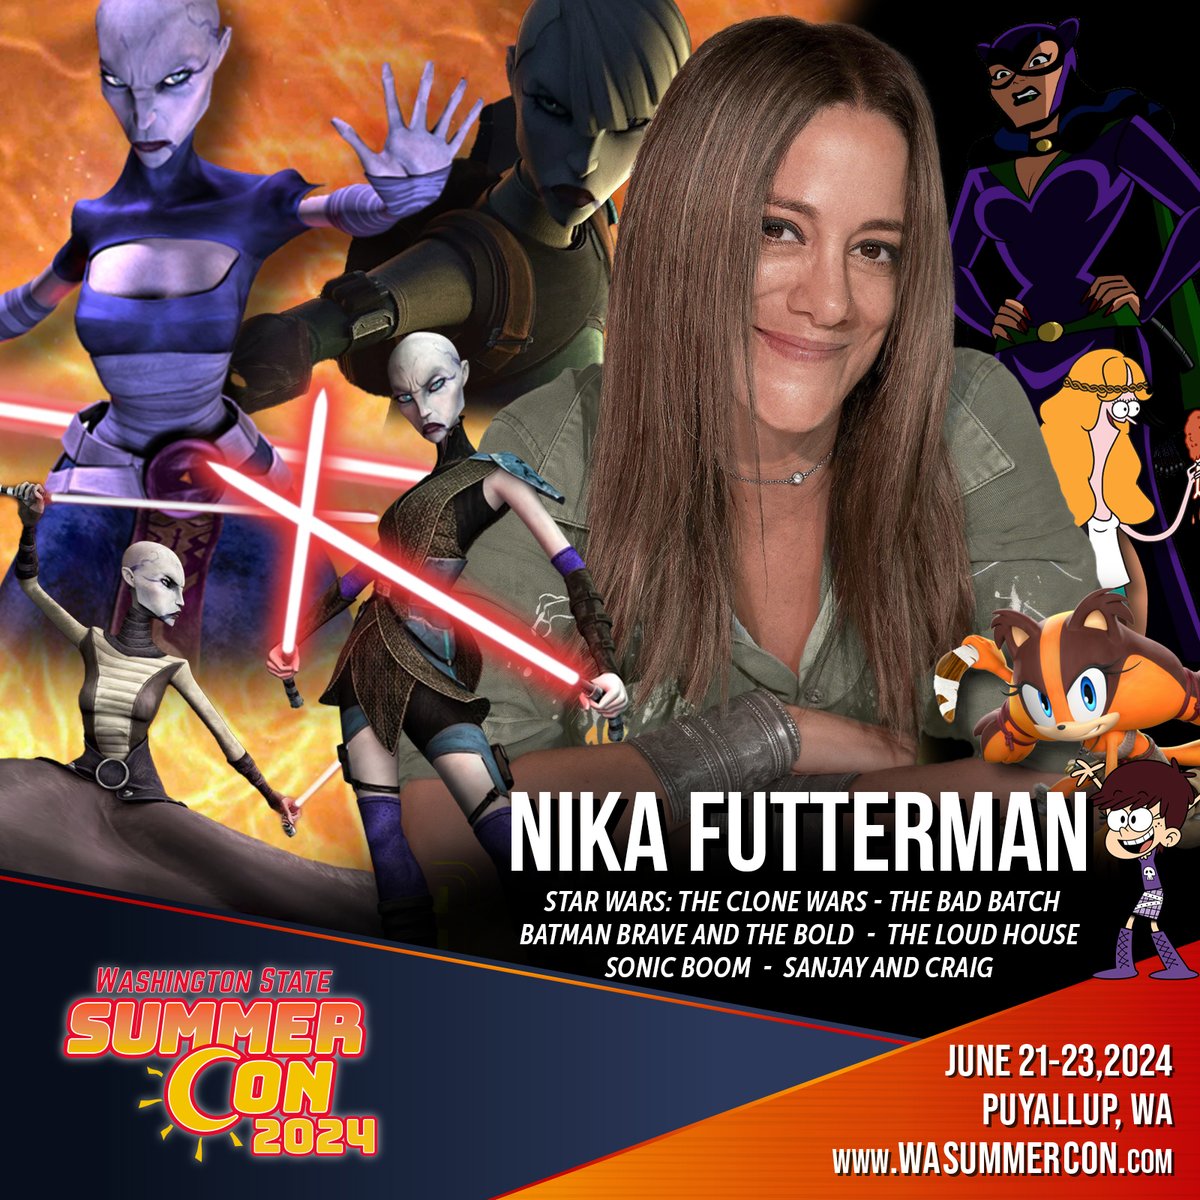 We have VENTRESS. (If you haven't watched this week's The Bad Batch, then chalk this announcement up as simply random.) We are excited to bring a favorite from the Clone Wars (and now The Bad Batch) to the Washington State Summer Con in Puyallup from June 21st through the 23rd.